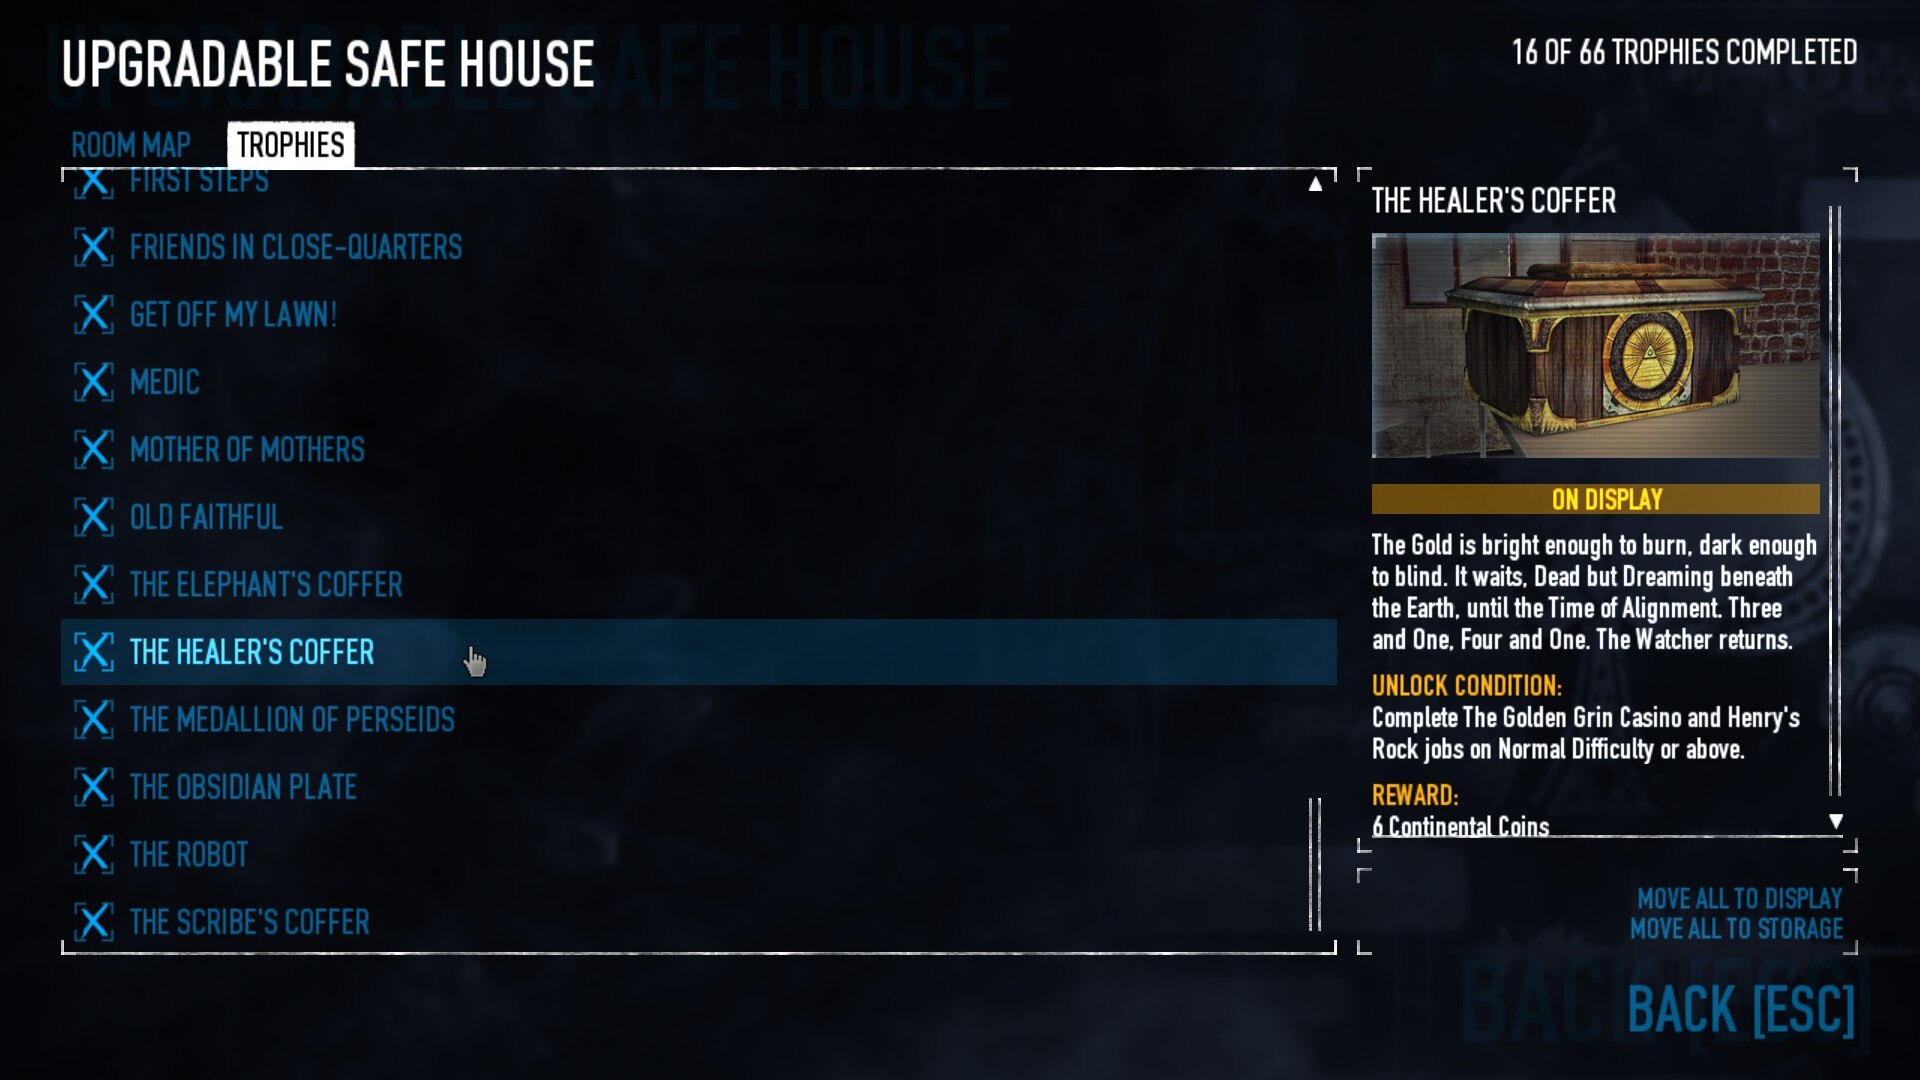 Payday 2 my safe house фото 63